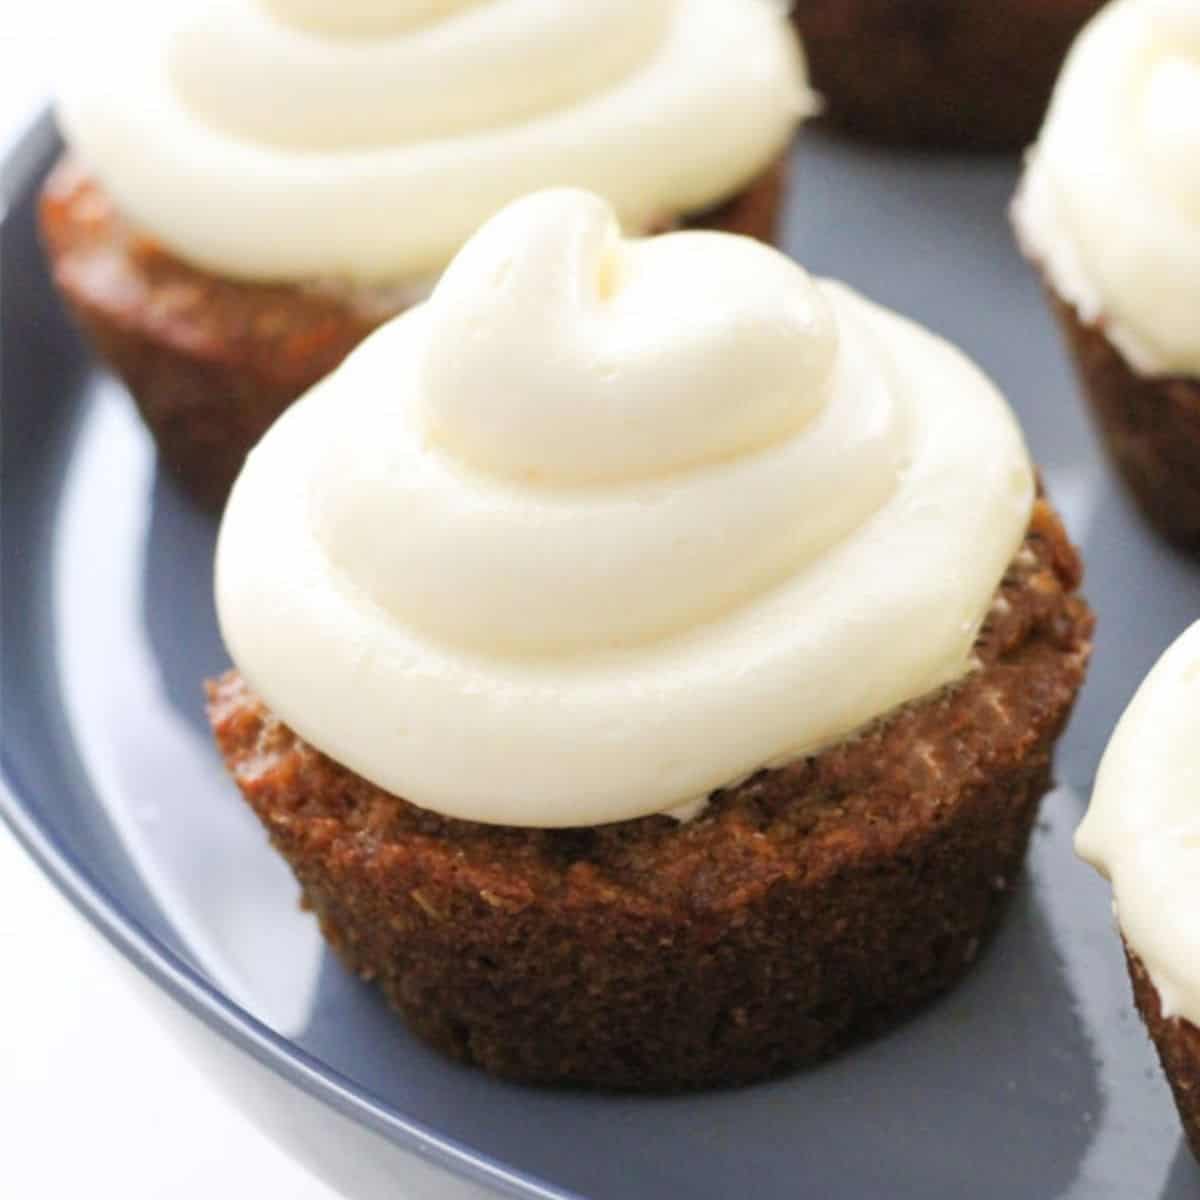 carrot cupcakes on a cake stand.